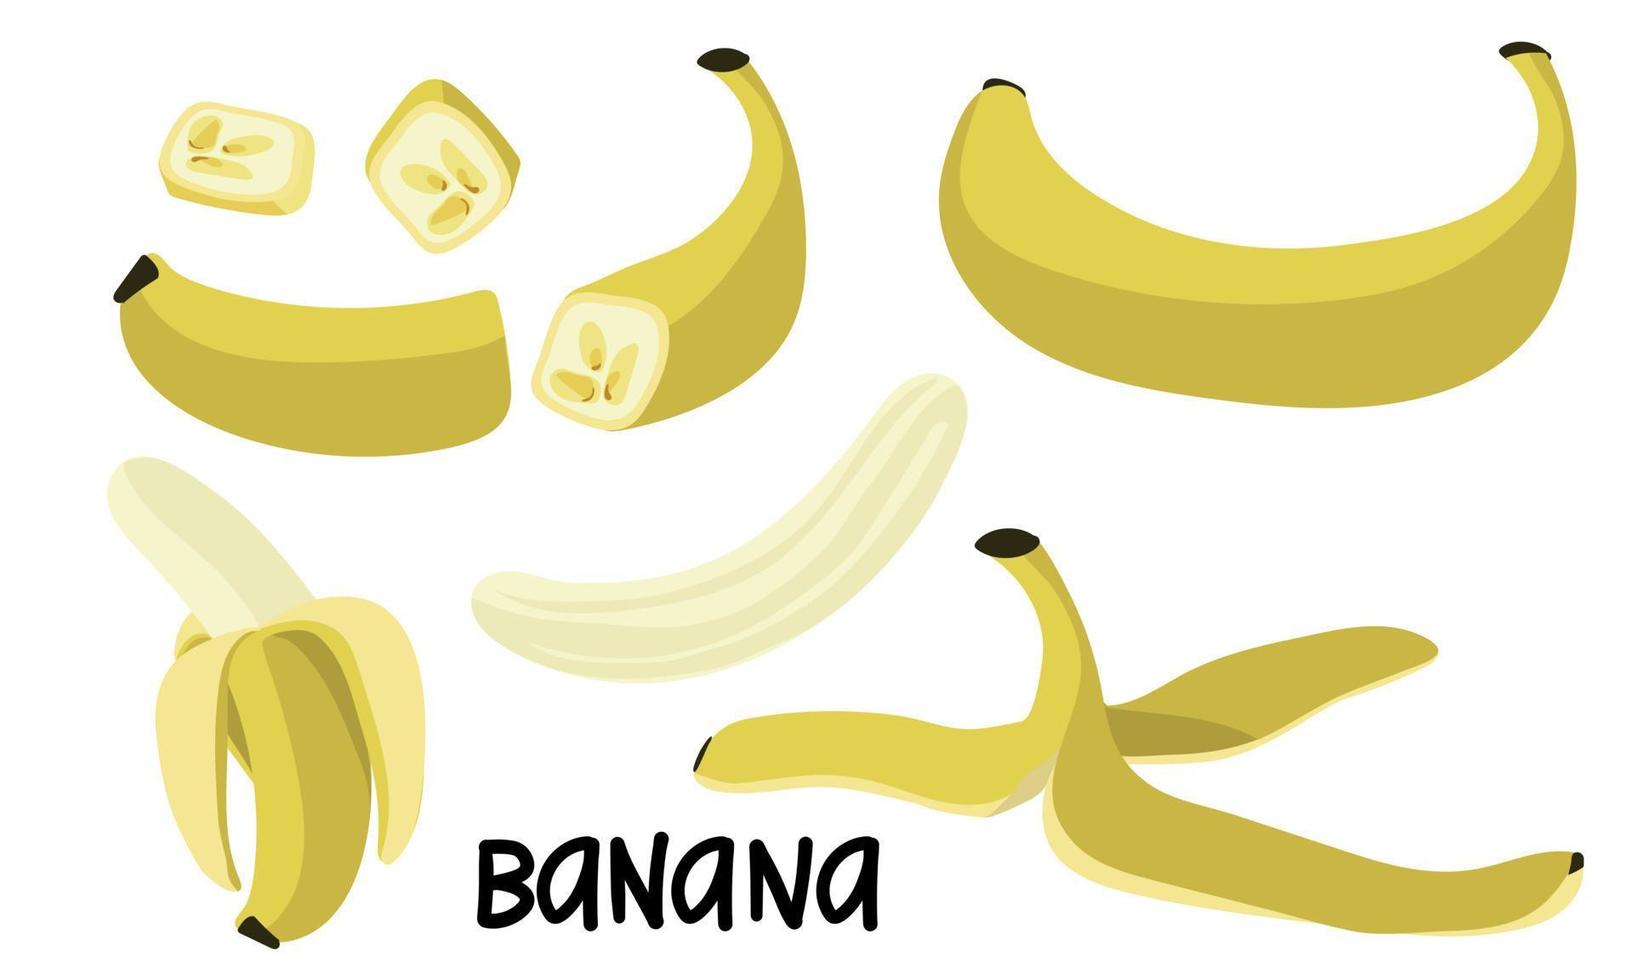 A set of bananas in different versions is whole and in section. Bananas chopped, half. Peel the banana, yellow fruit. Tropical fruits, banana snacks or vegetarian meals. Icon set isolated vector